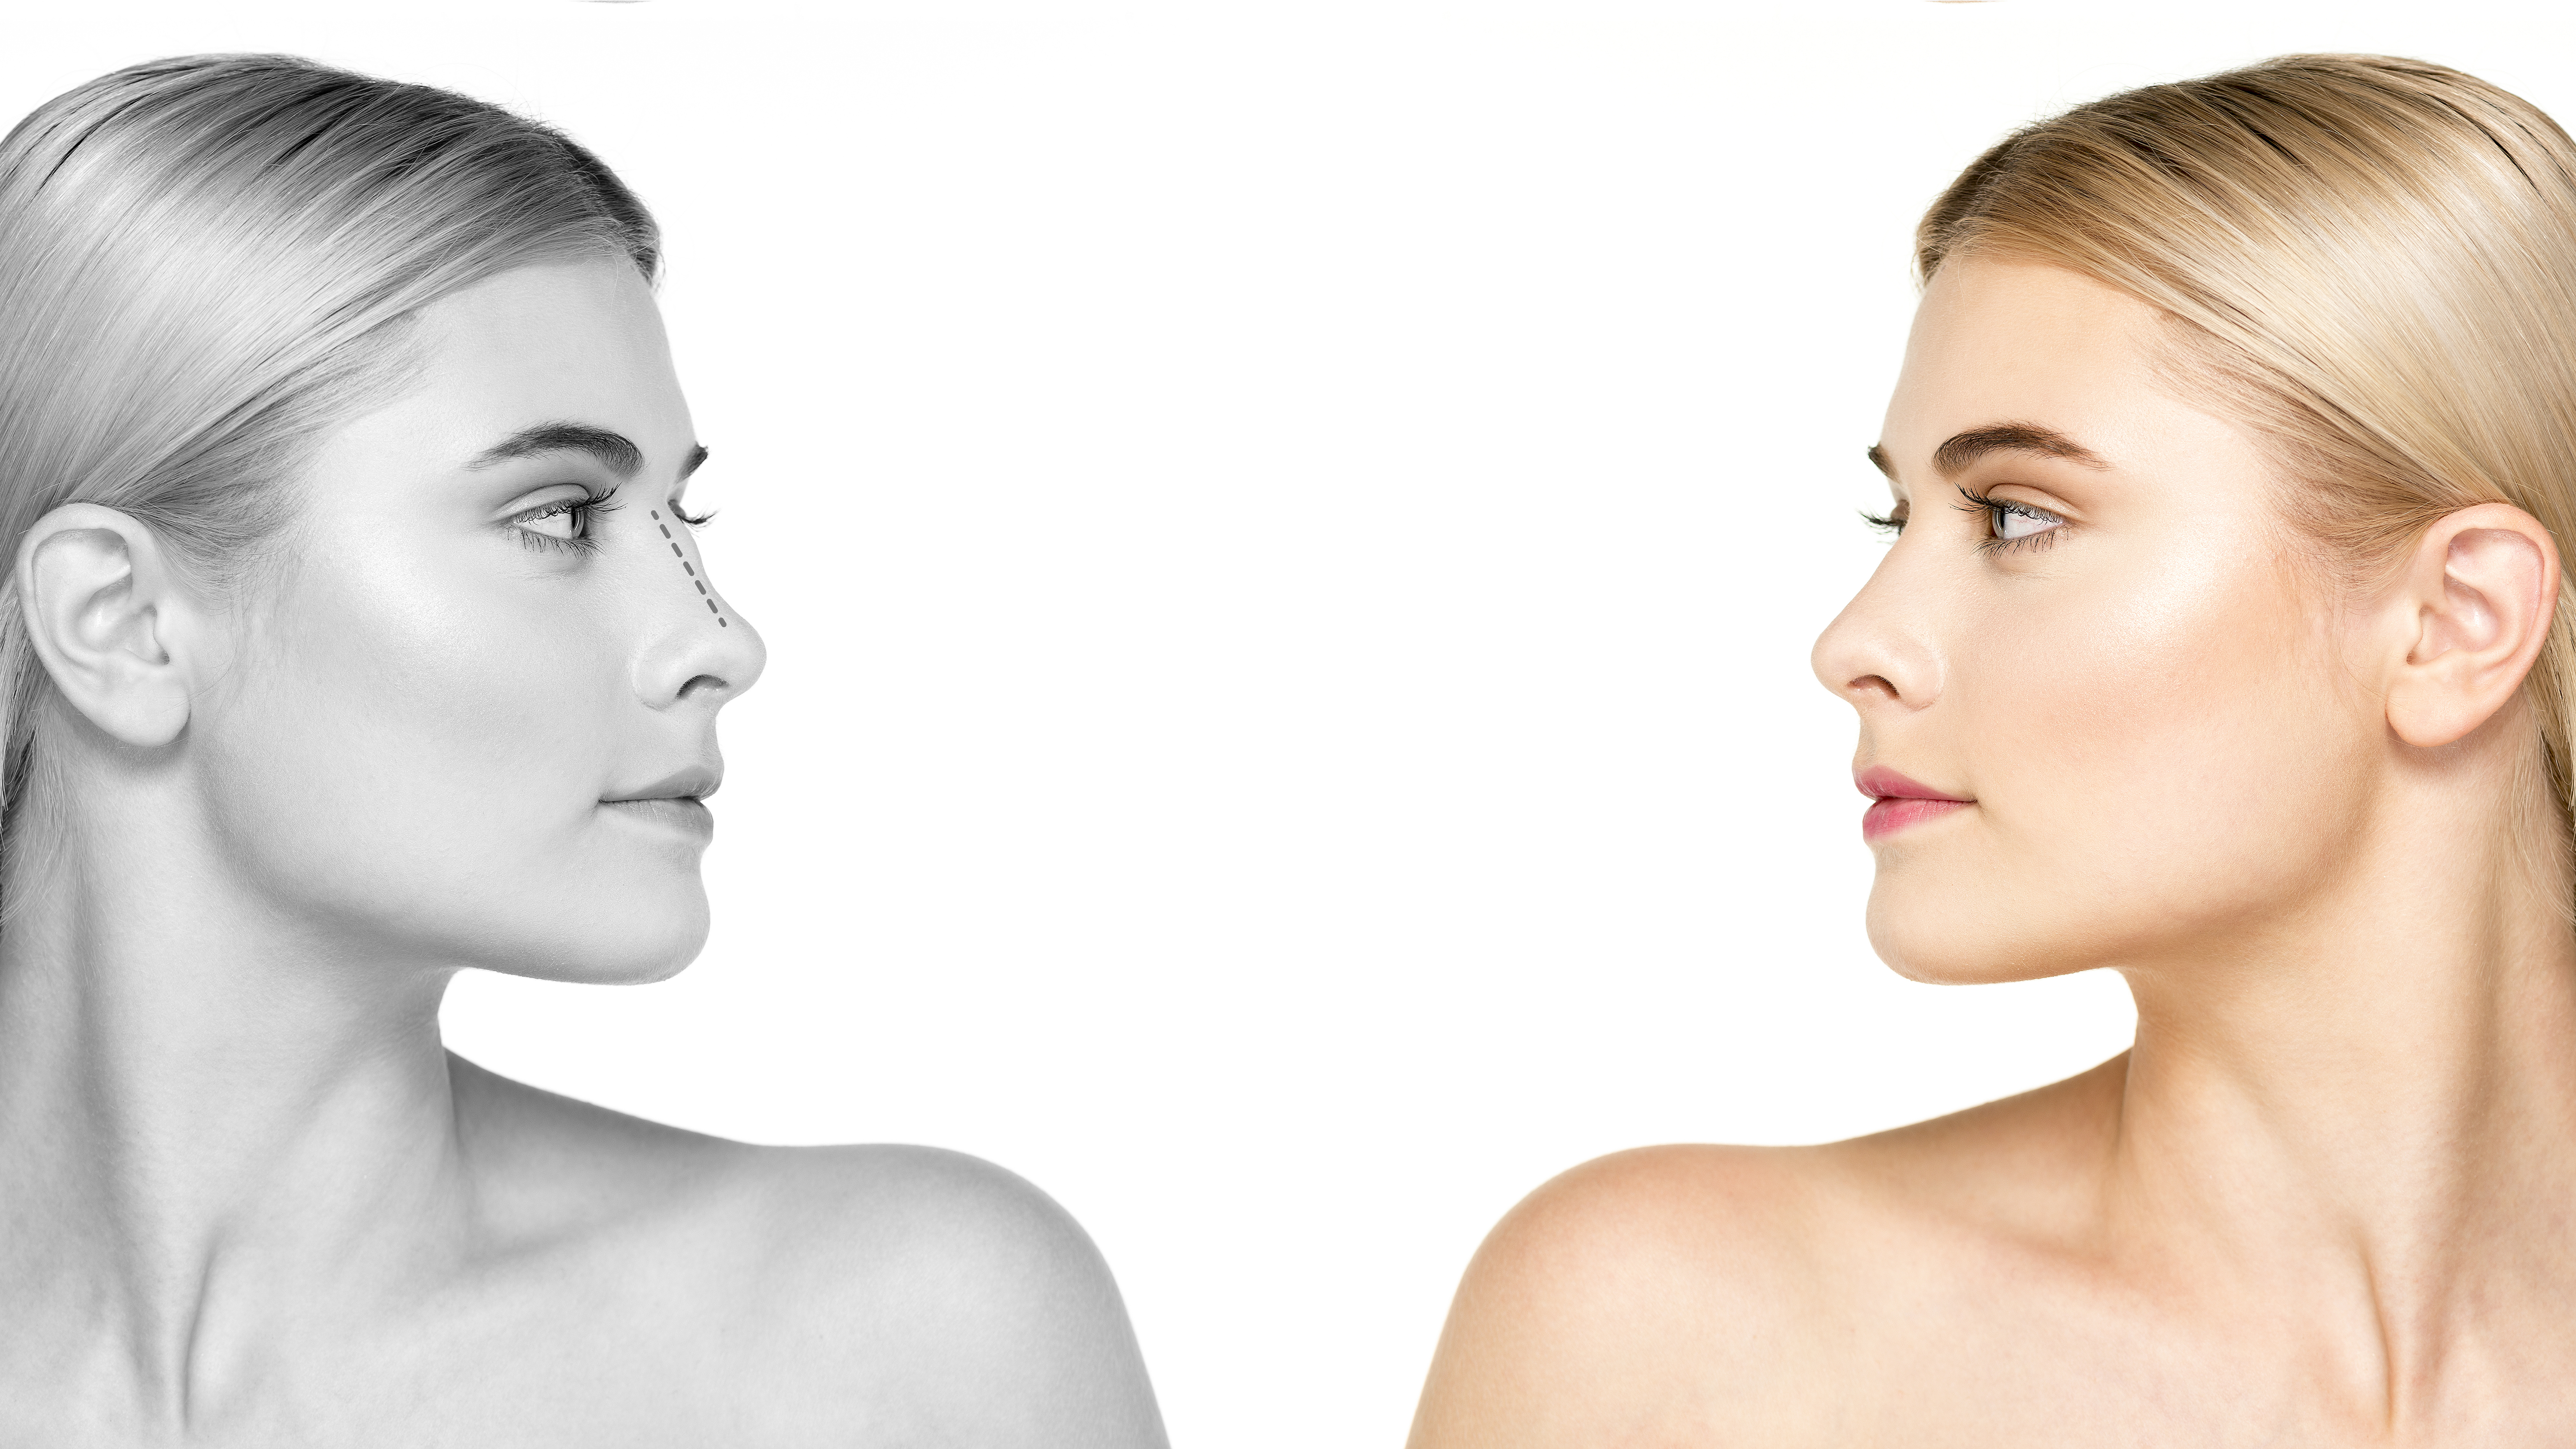 side-view-woman-before-and-after-rhinoplasty